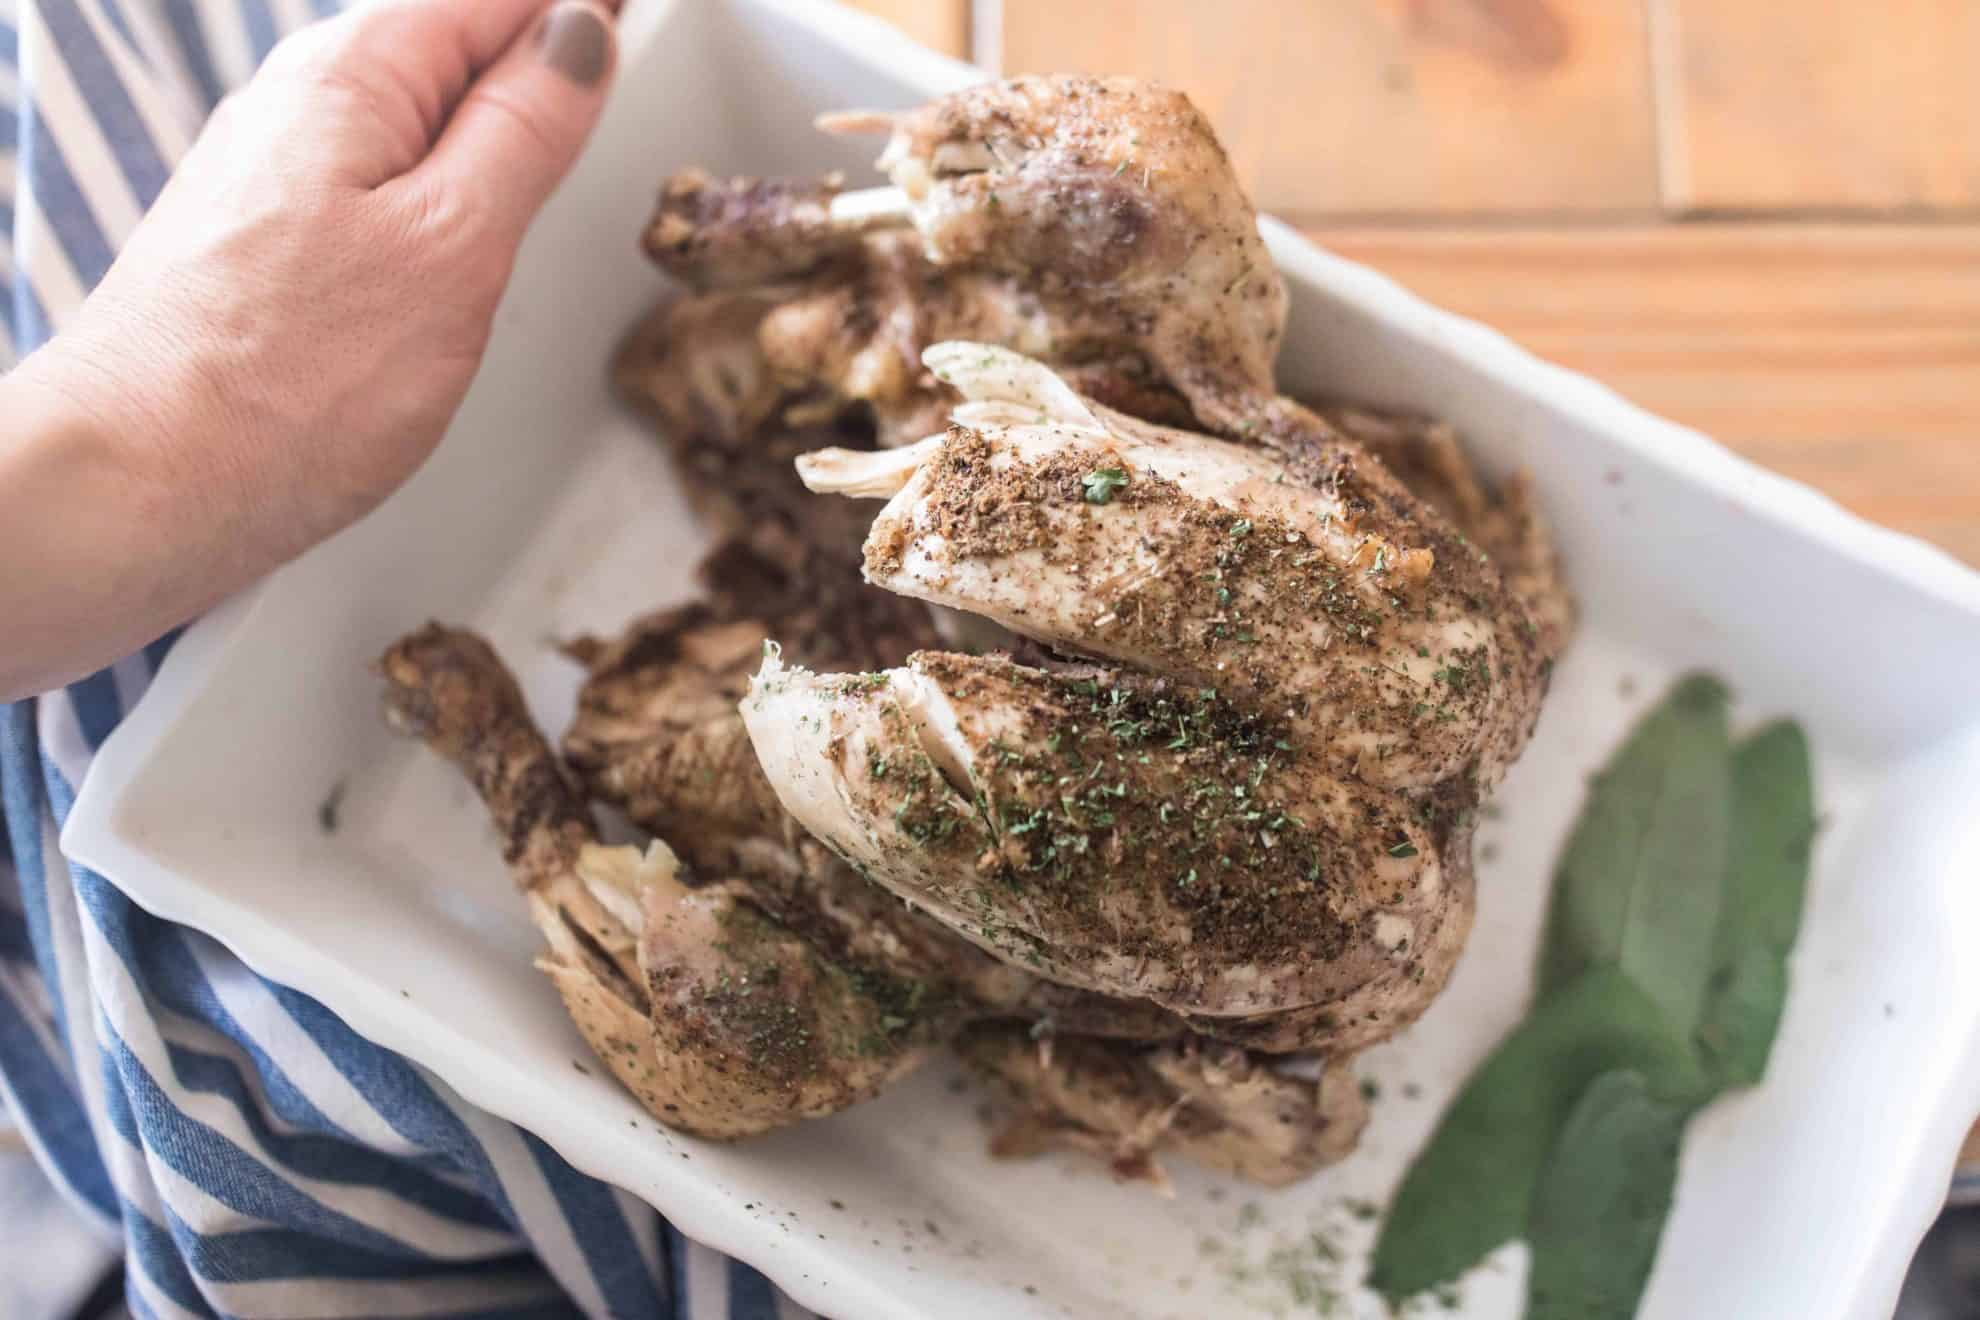 https://www.farmhouseonboone.com/wp-content/uploads/2019/07/how-to-make-a-whole-chicken-in-the-instant-pot-4.jpg